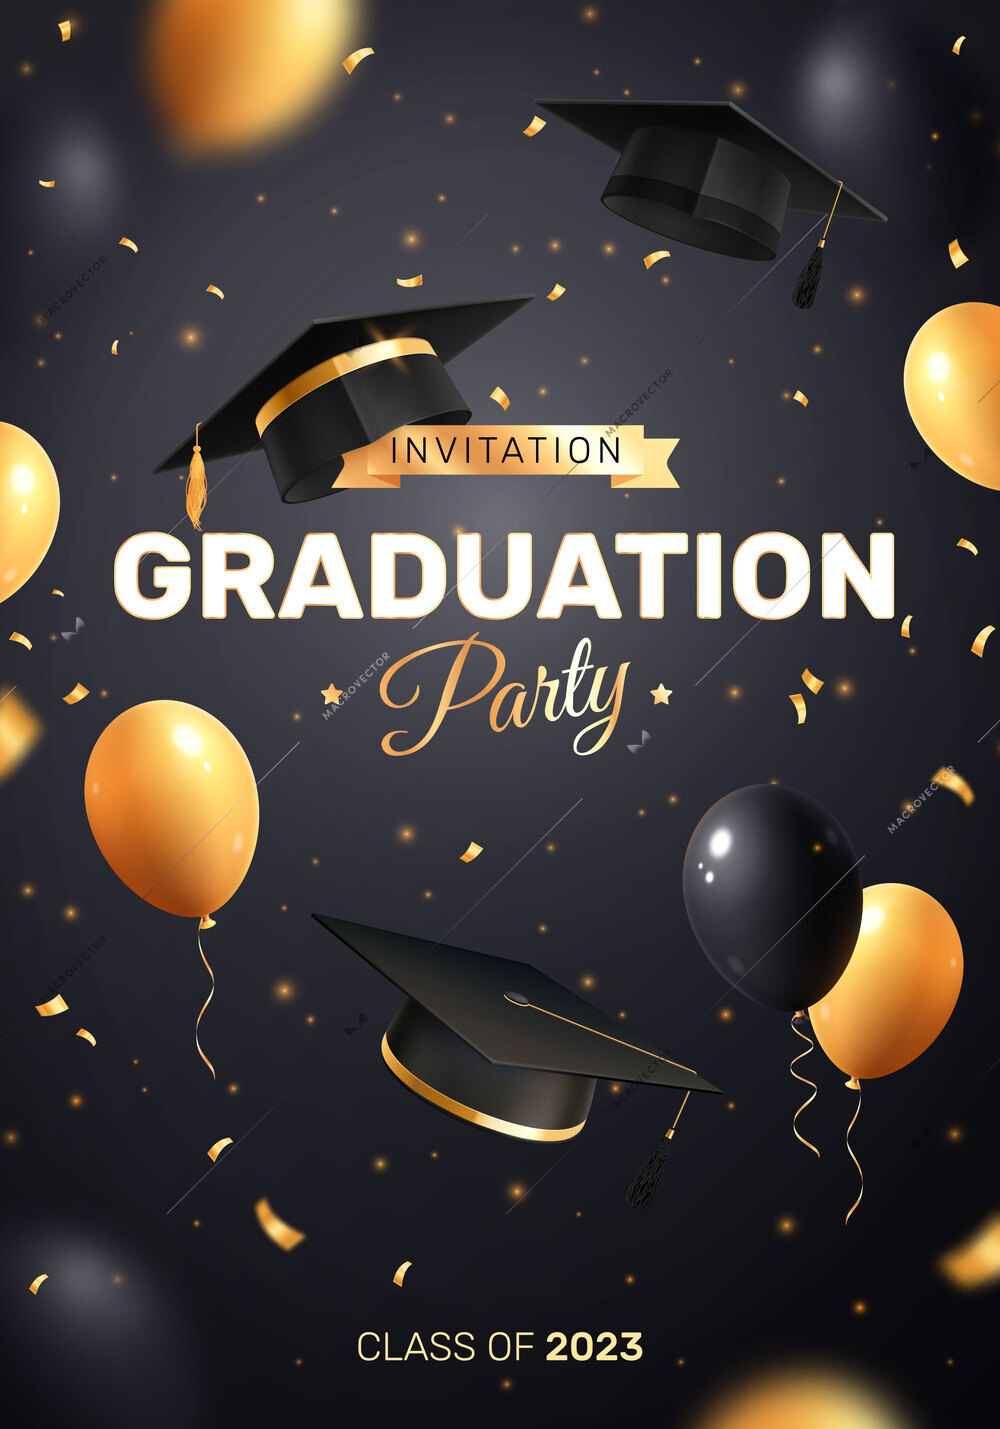 Graduation party invitation realistic composition with ornate text flying balloons golden confetti and academic hat images vector illustration